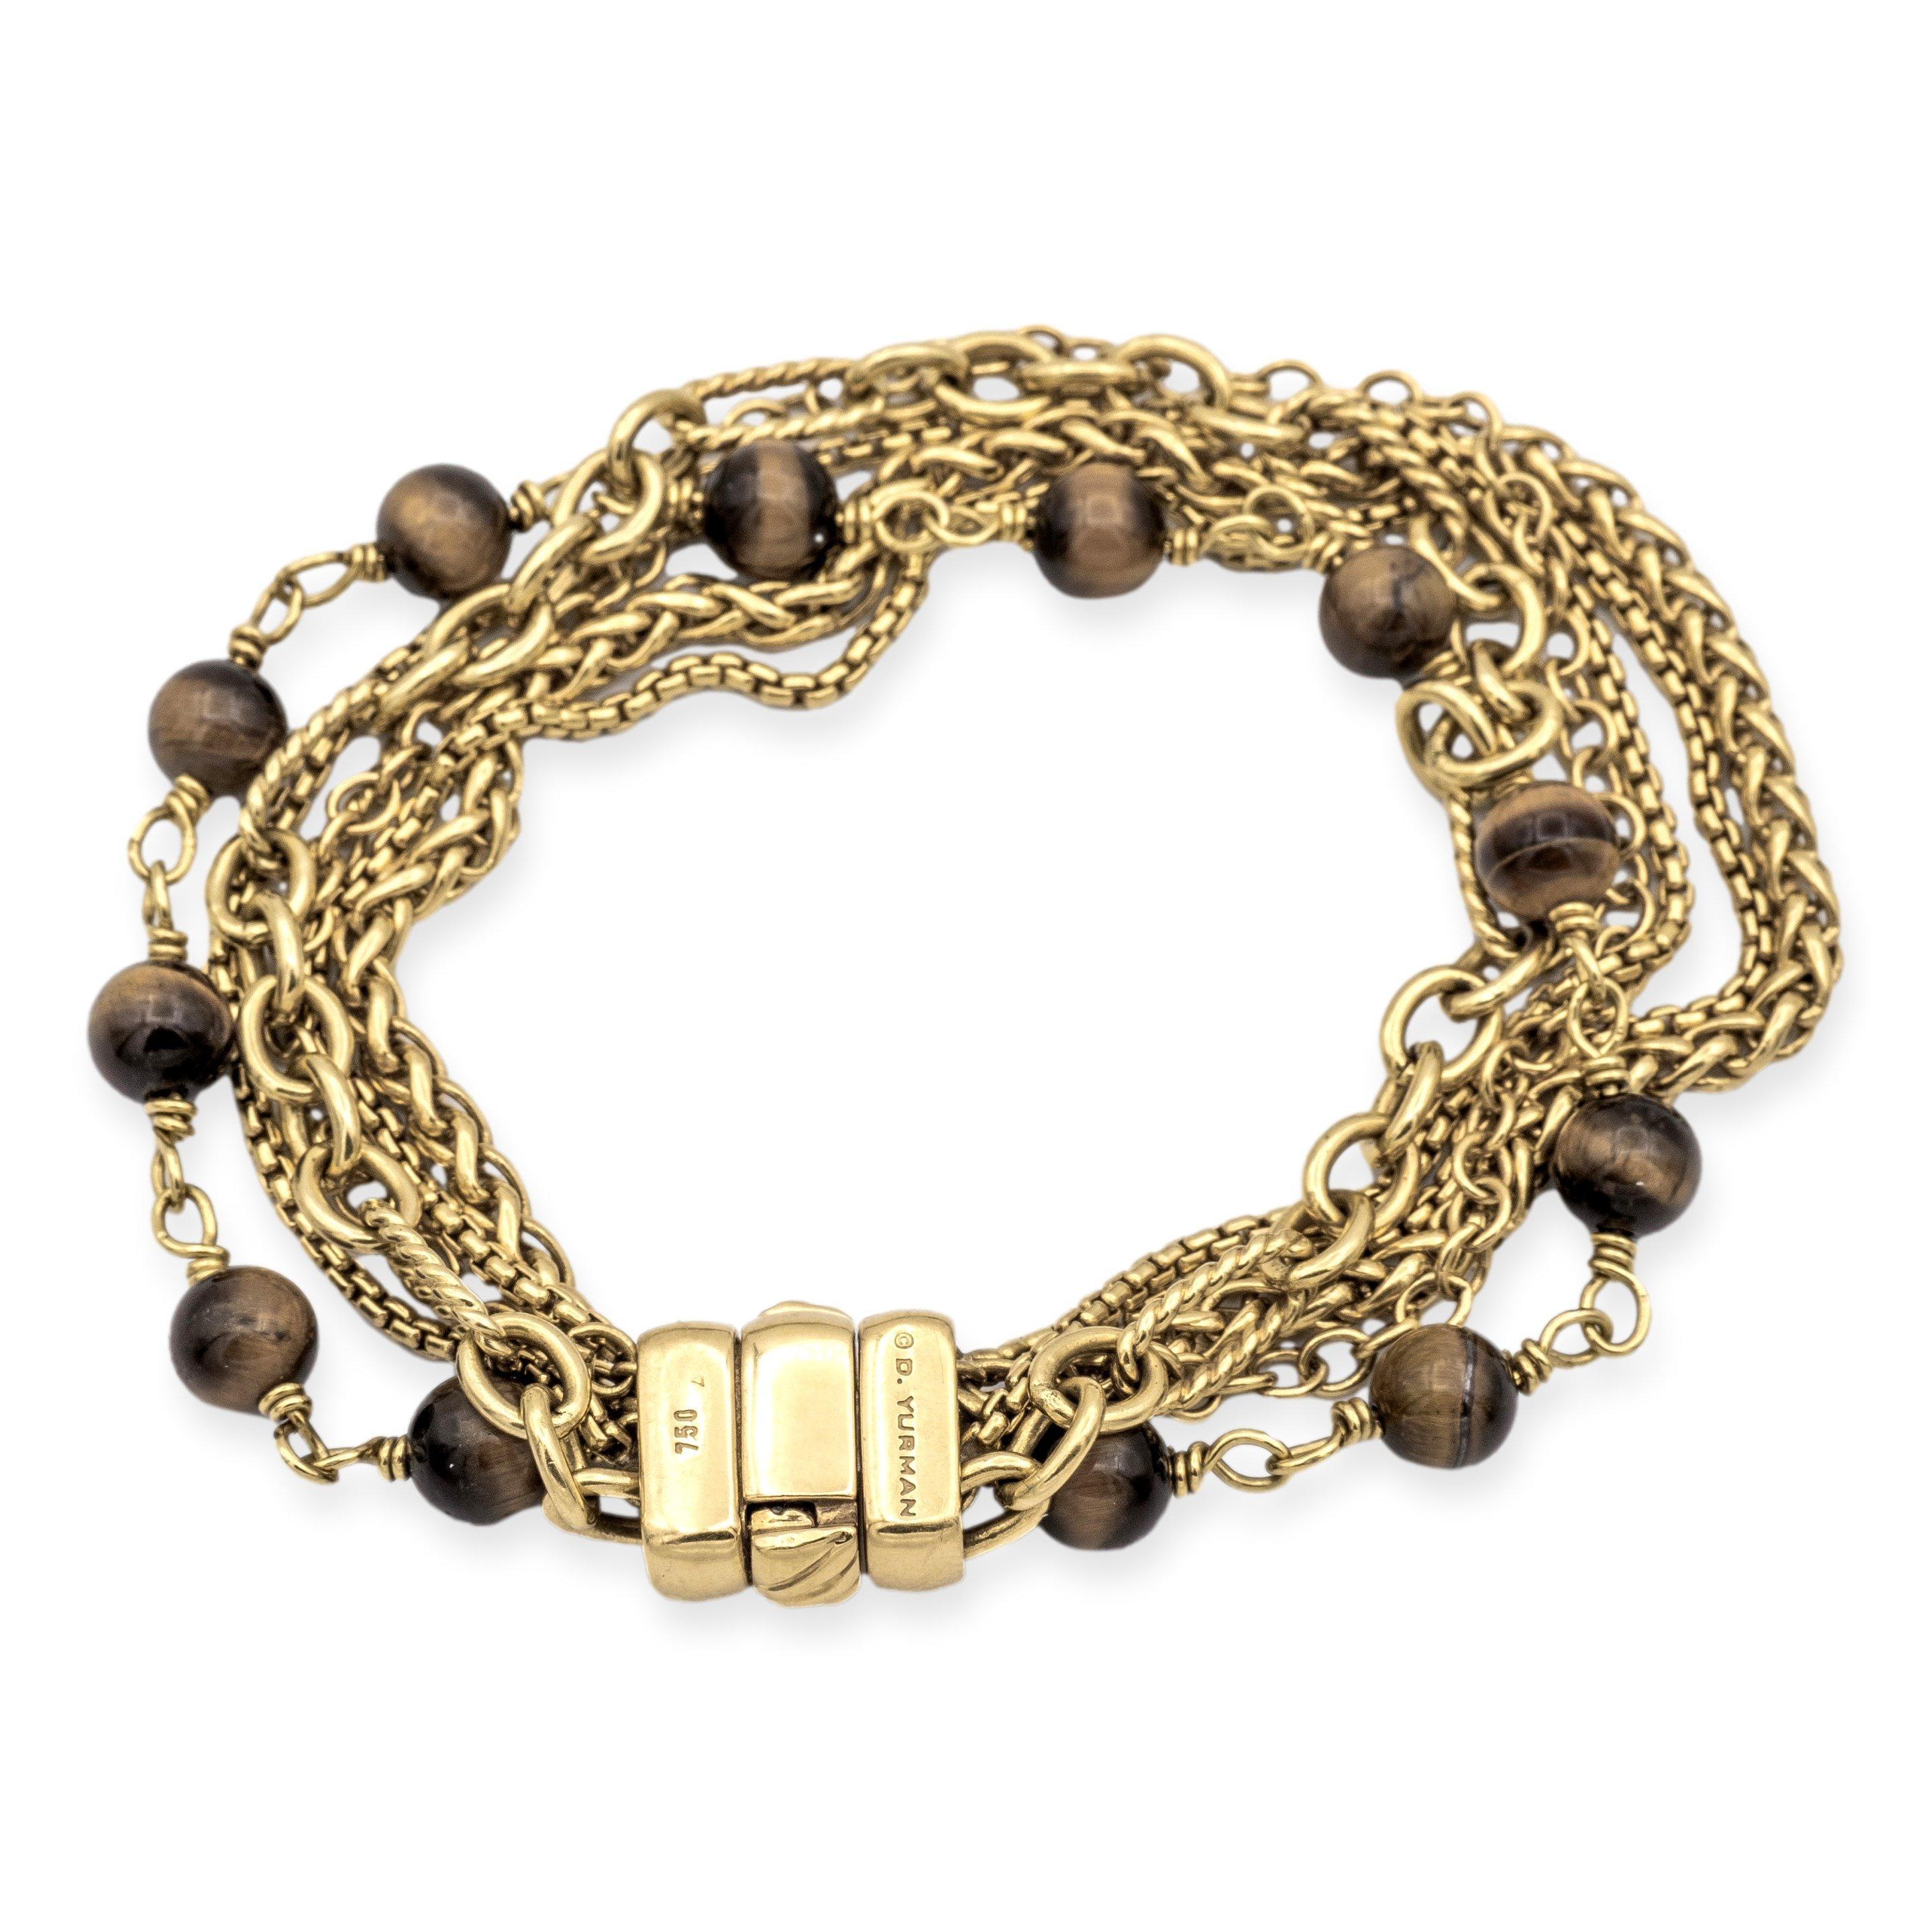 David Yurman Multi Chain Bracelet featuring six strands from Yurman's signature link chain collections, with one strand adorned with tiger eye spiritual beads measuring 6 mm each. The 7.5-inch bracelet ensures a comfortable fit, secured by a